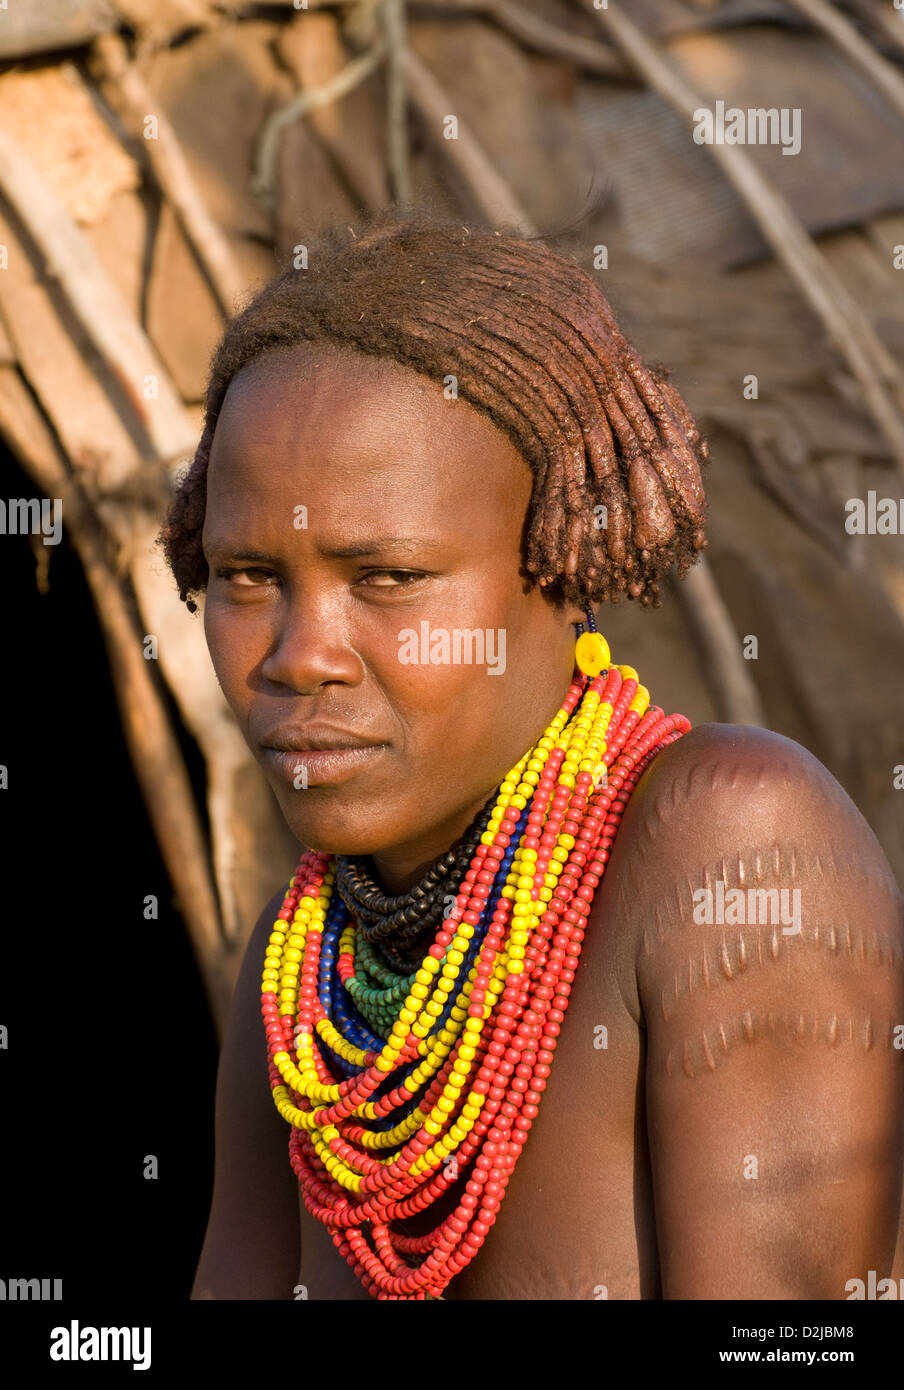 Portrait of Dassenech woman with body scarring-close up Stock Photo